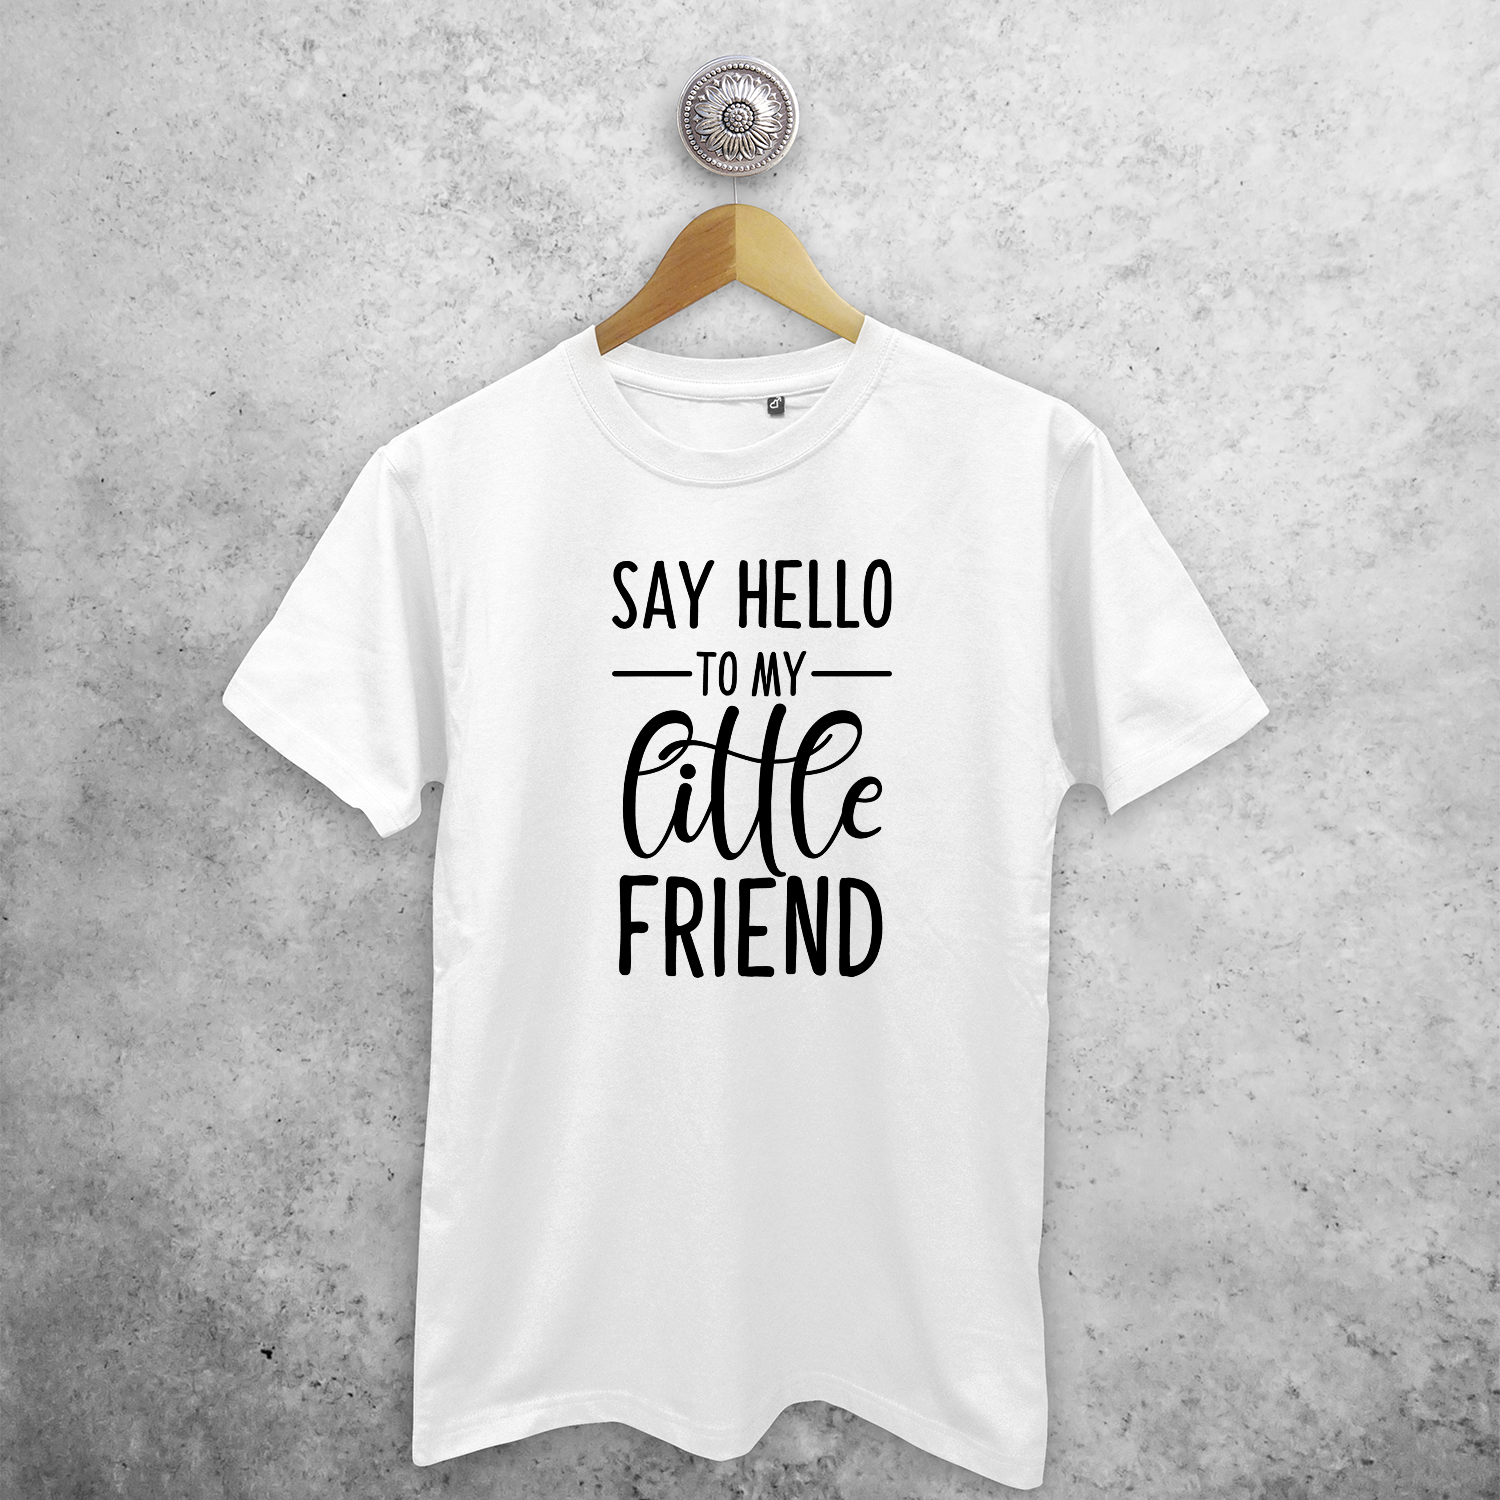 'Say hello to my little friend' adult shirt